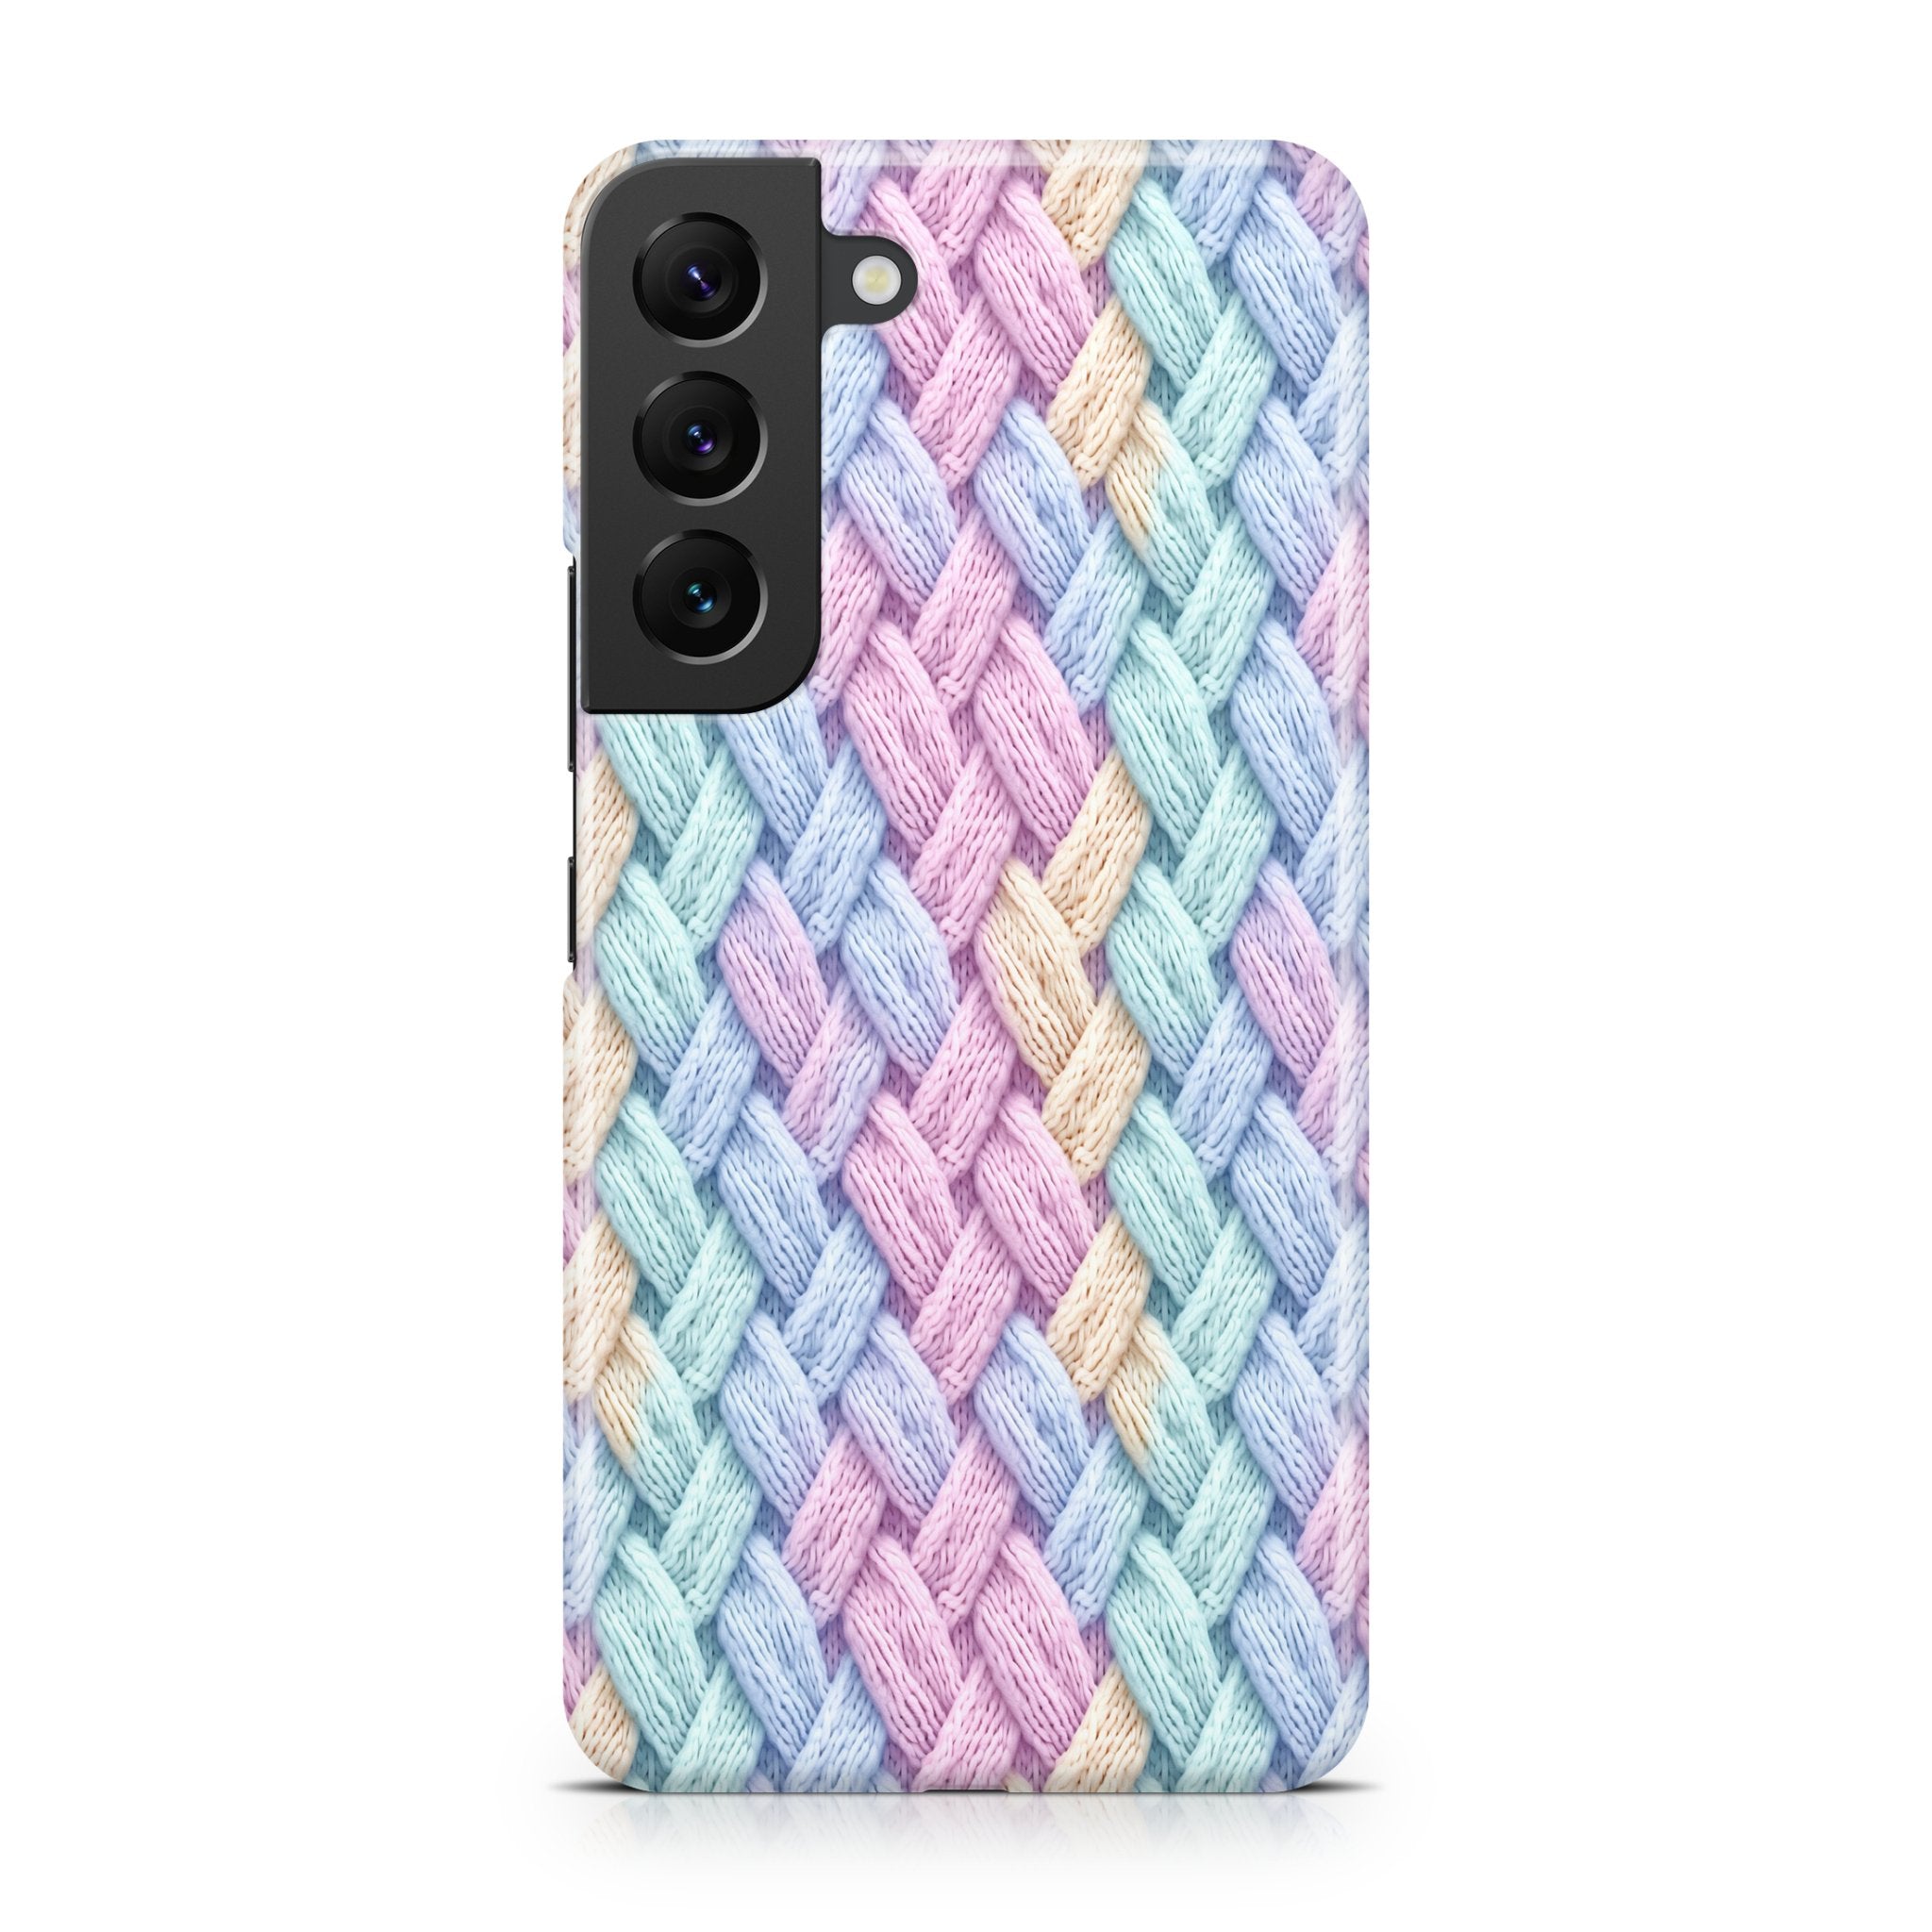 Whimsical Threads - Samsung phone case designs by CaseSwagger